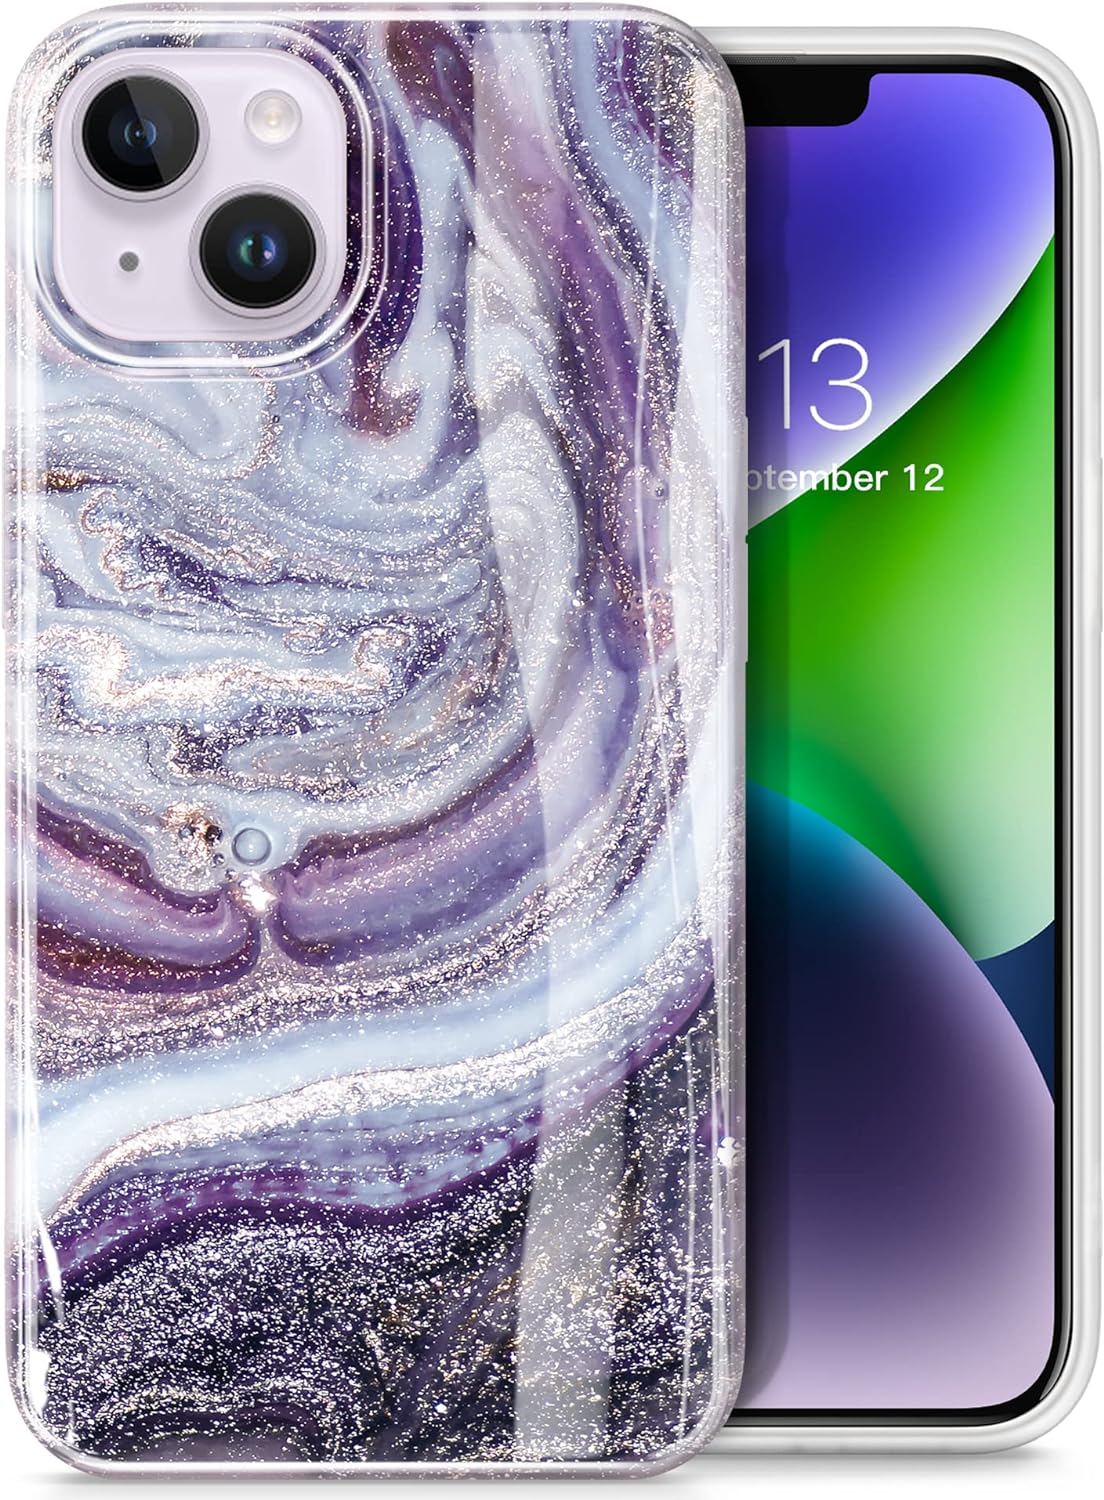 GVIEWIN Designed for iPhone 14 Case, for iPhone 13 Case 6.1, [10FT Military Grade Drop Test] Marble Soft Slim TPU Protective Shockproof Phone Case Cover, Milky Way/Purple